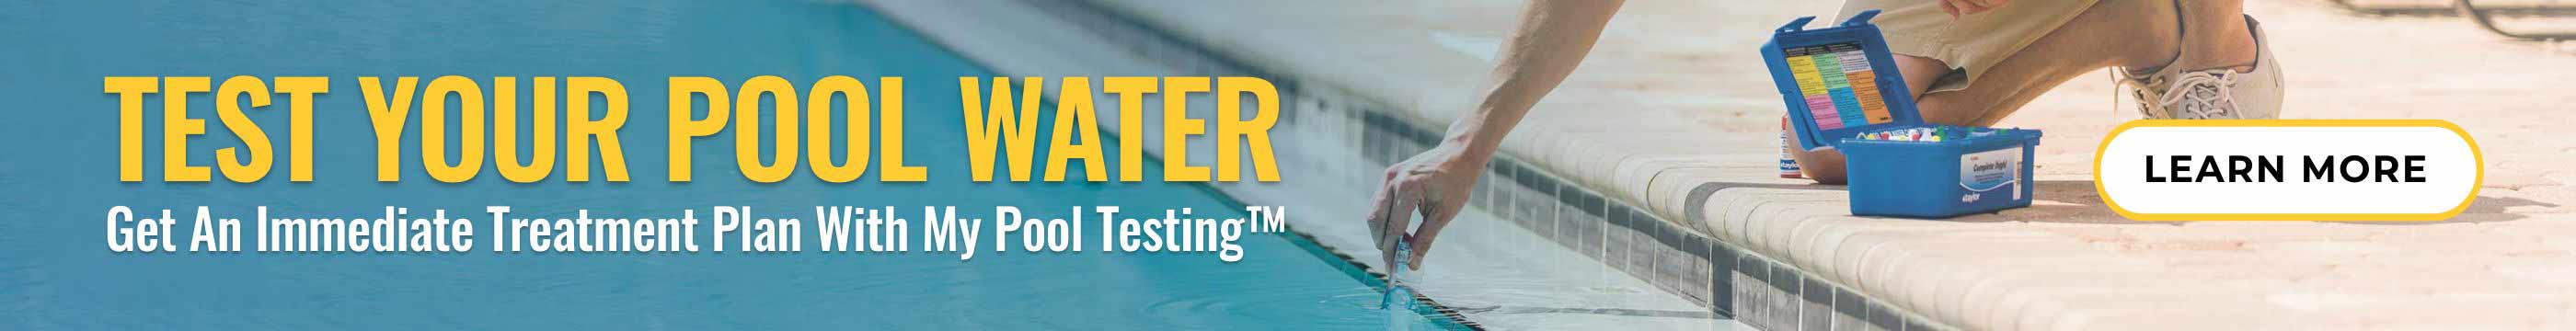 Test Your Pool Water With My Pool Testing™